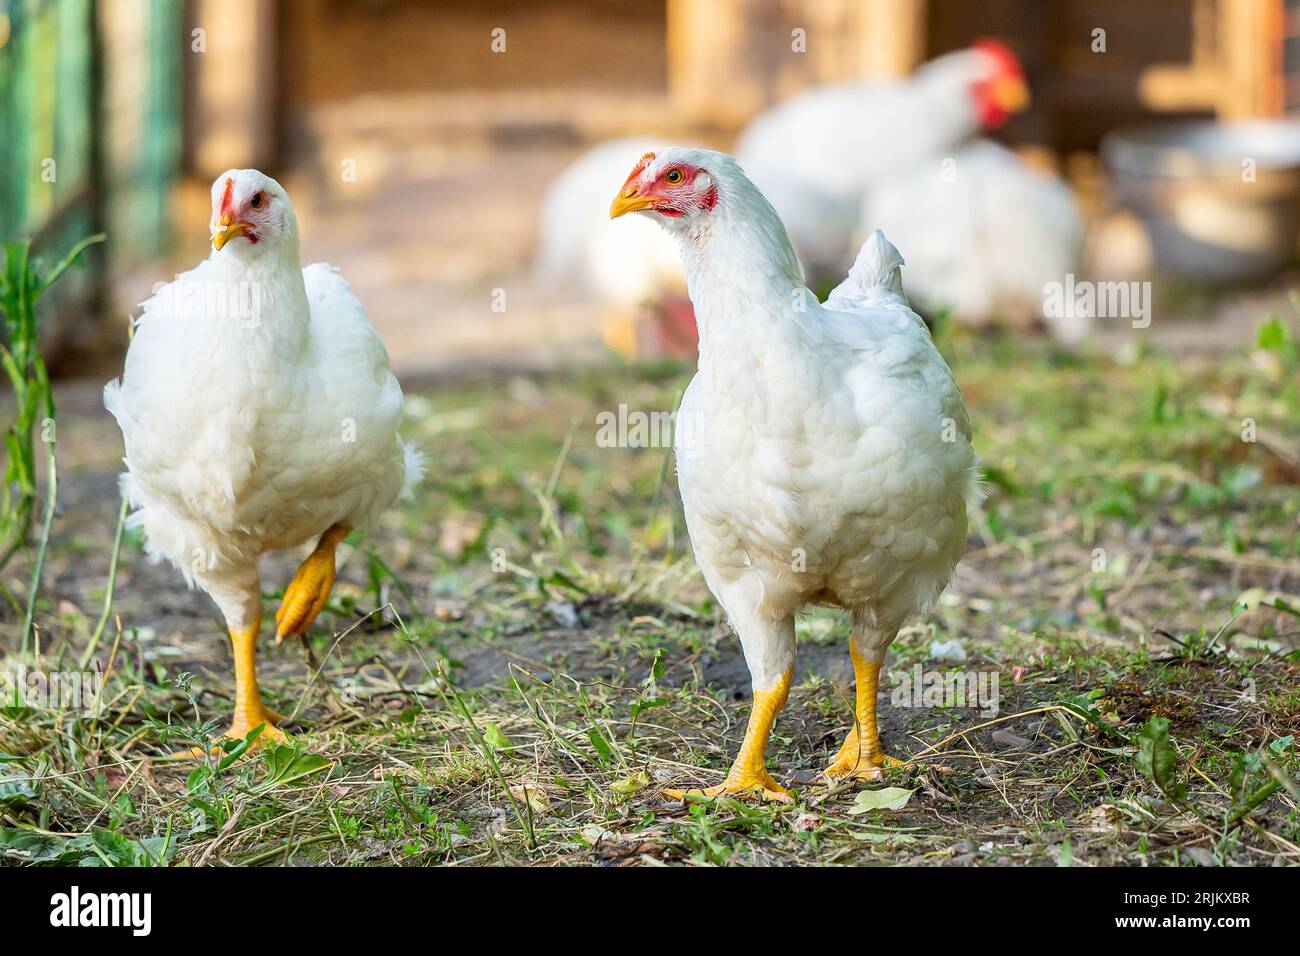 Several white chickens walking on a lush green grassy field Stock Photo